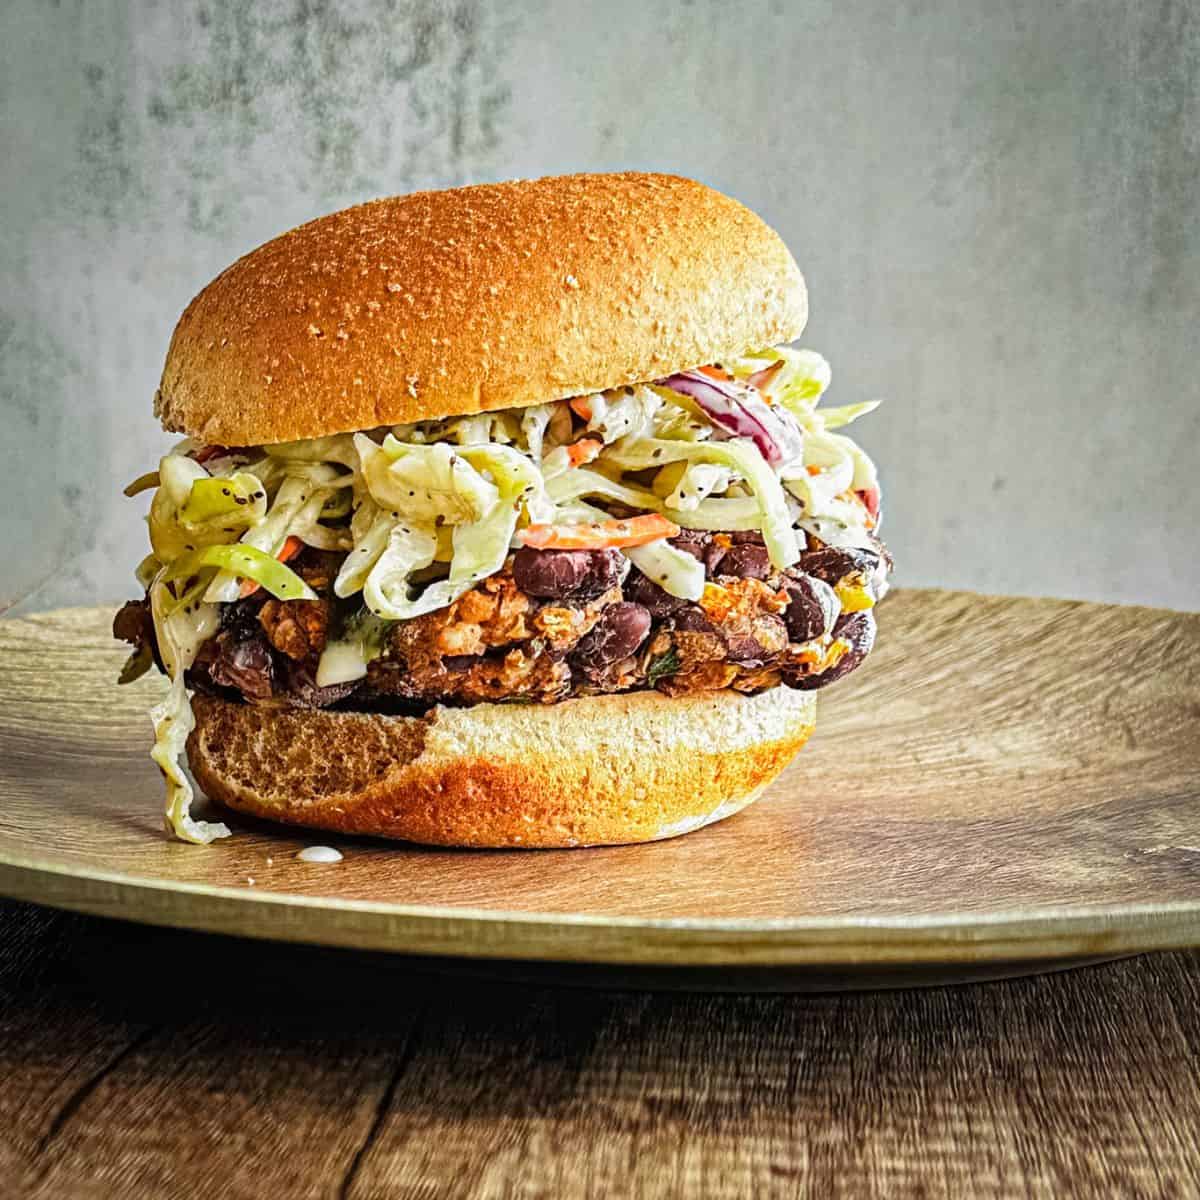 chipotle black bean burger on a plate. Burger is topped with vegan coleslaw